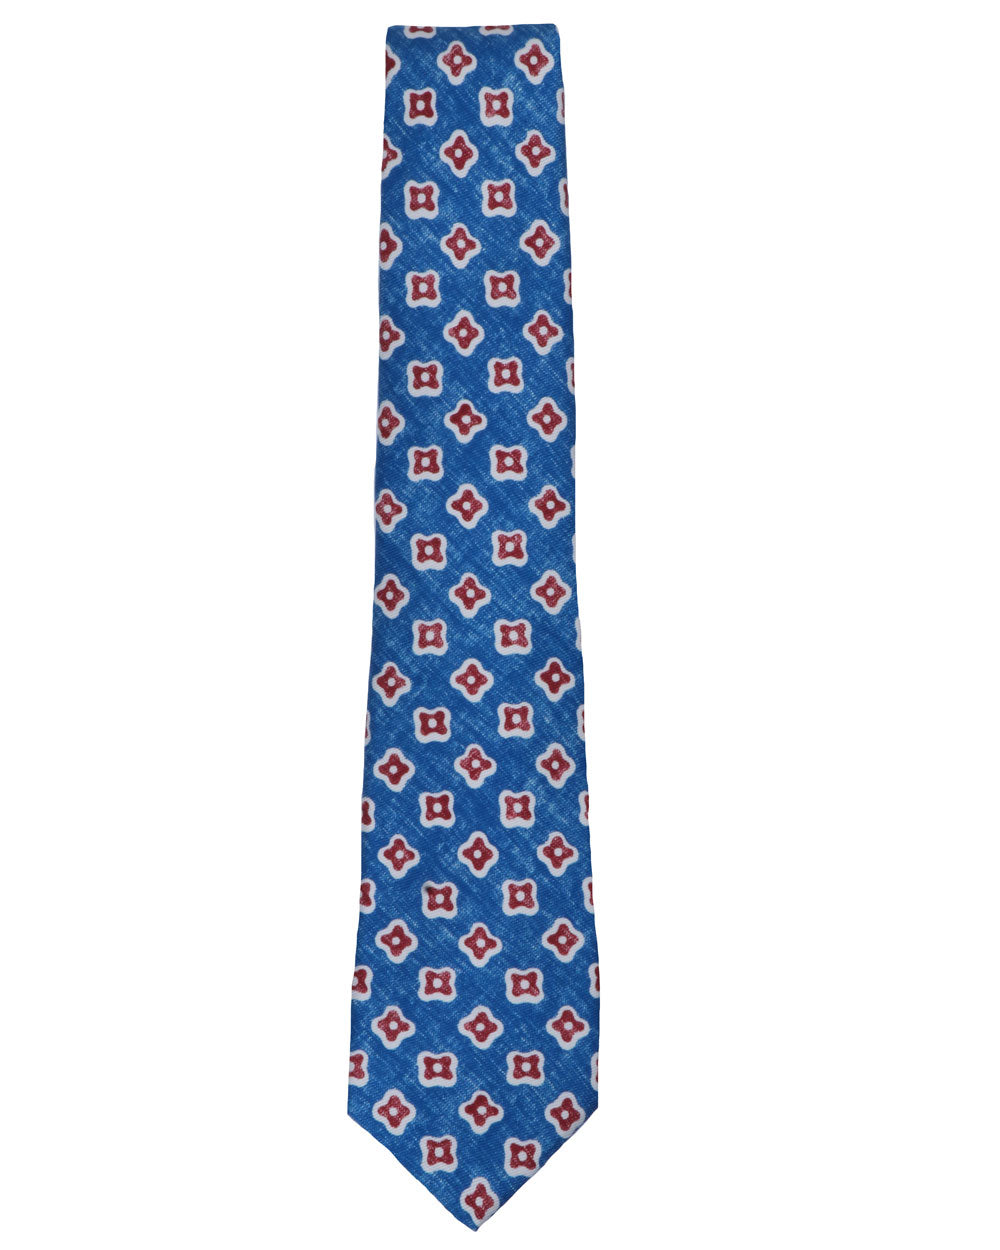 Blue and Maroon Abstract Floral Tie